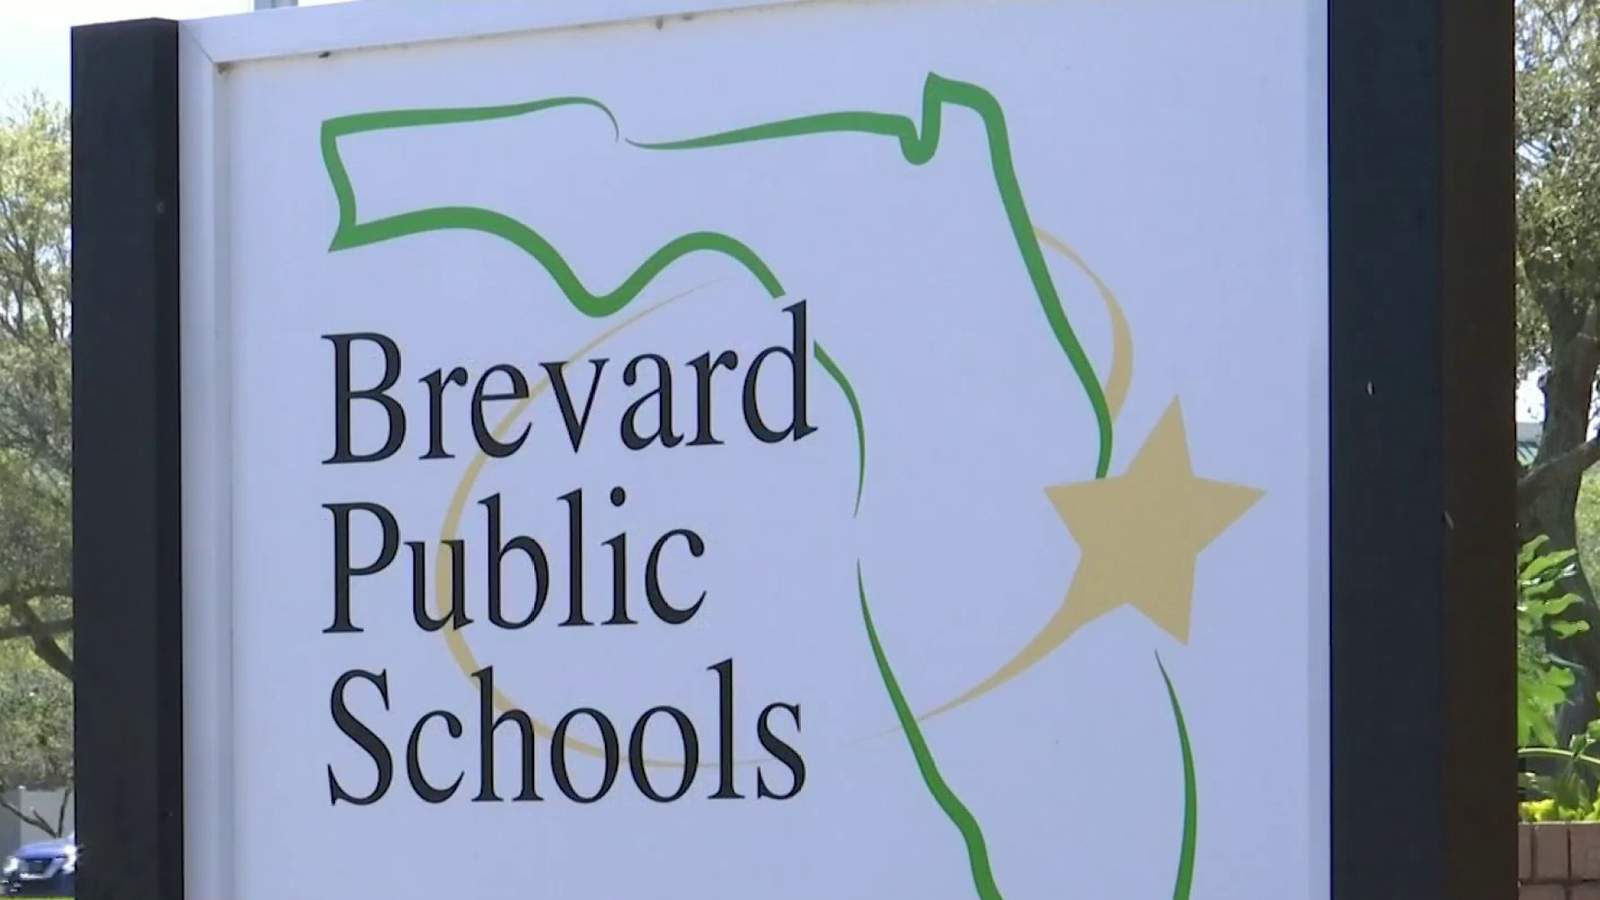 Brevard School guidelines on trans bathrooms and sports face backlash